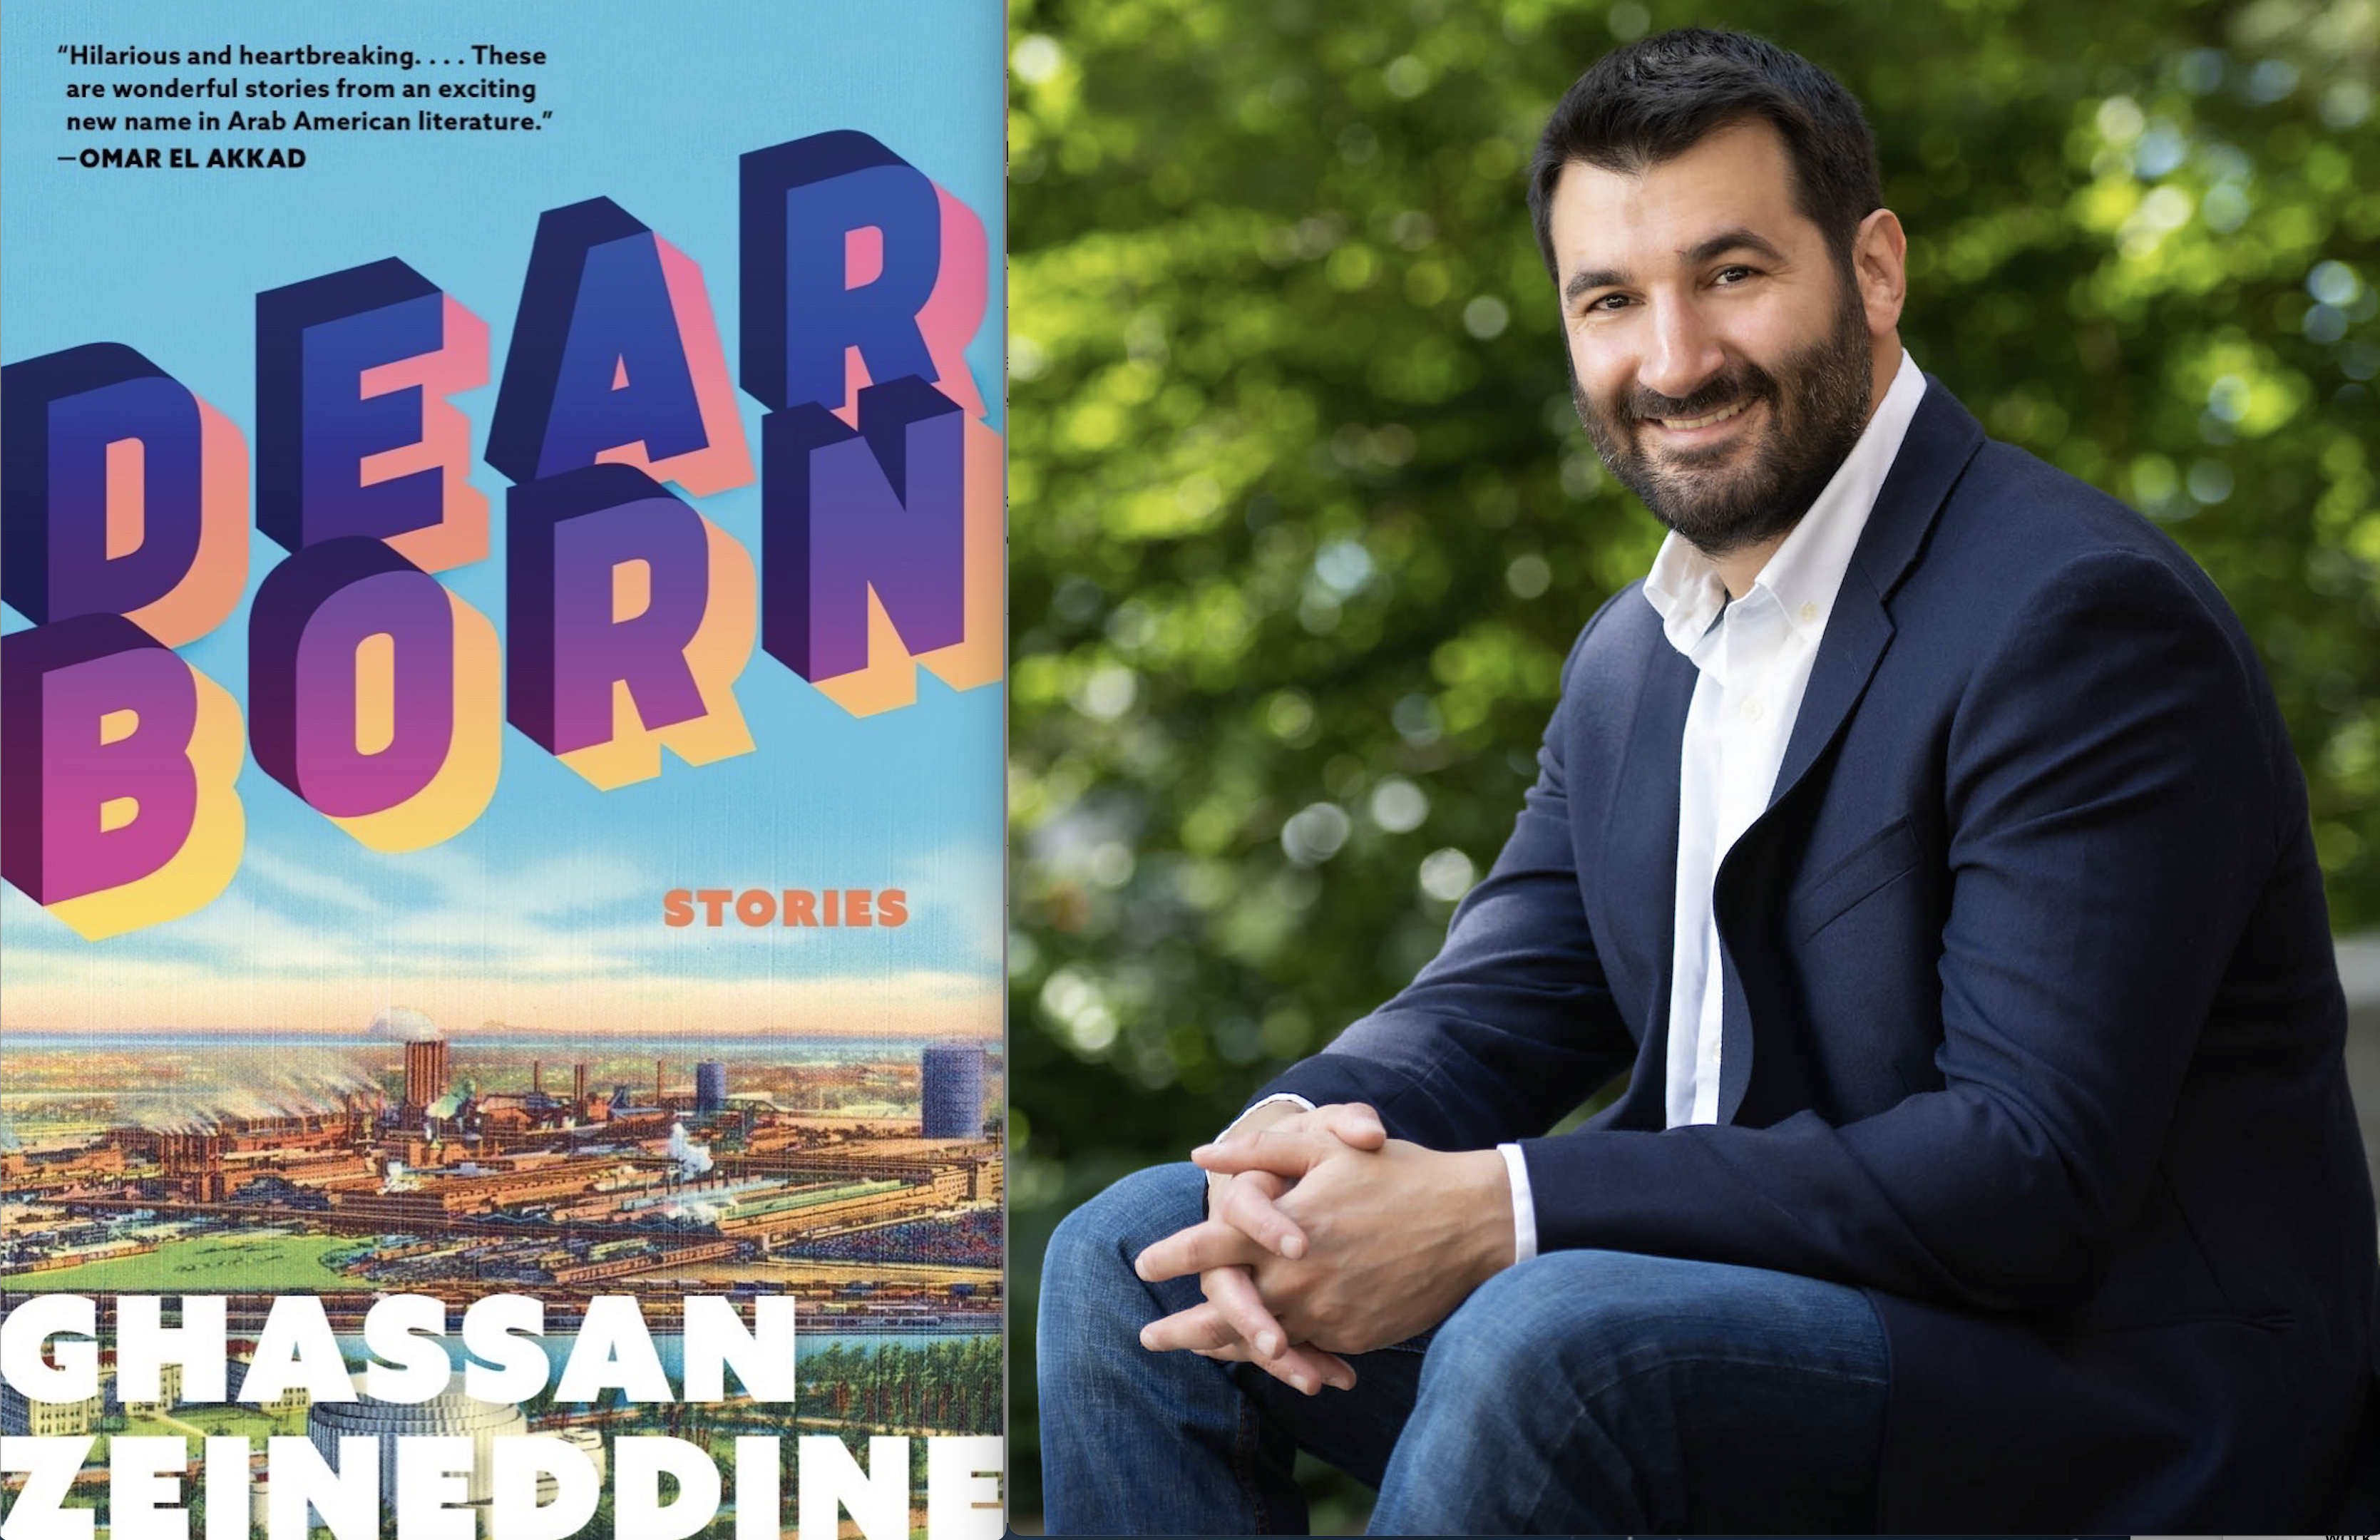 At right, the cover of "Dearborn" by alumnus author Ghassan Zeineddine